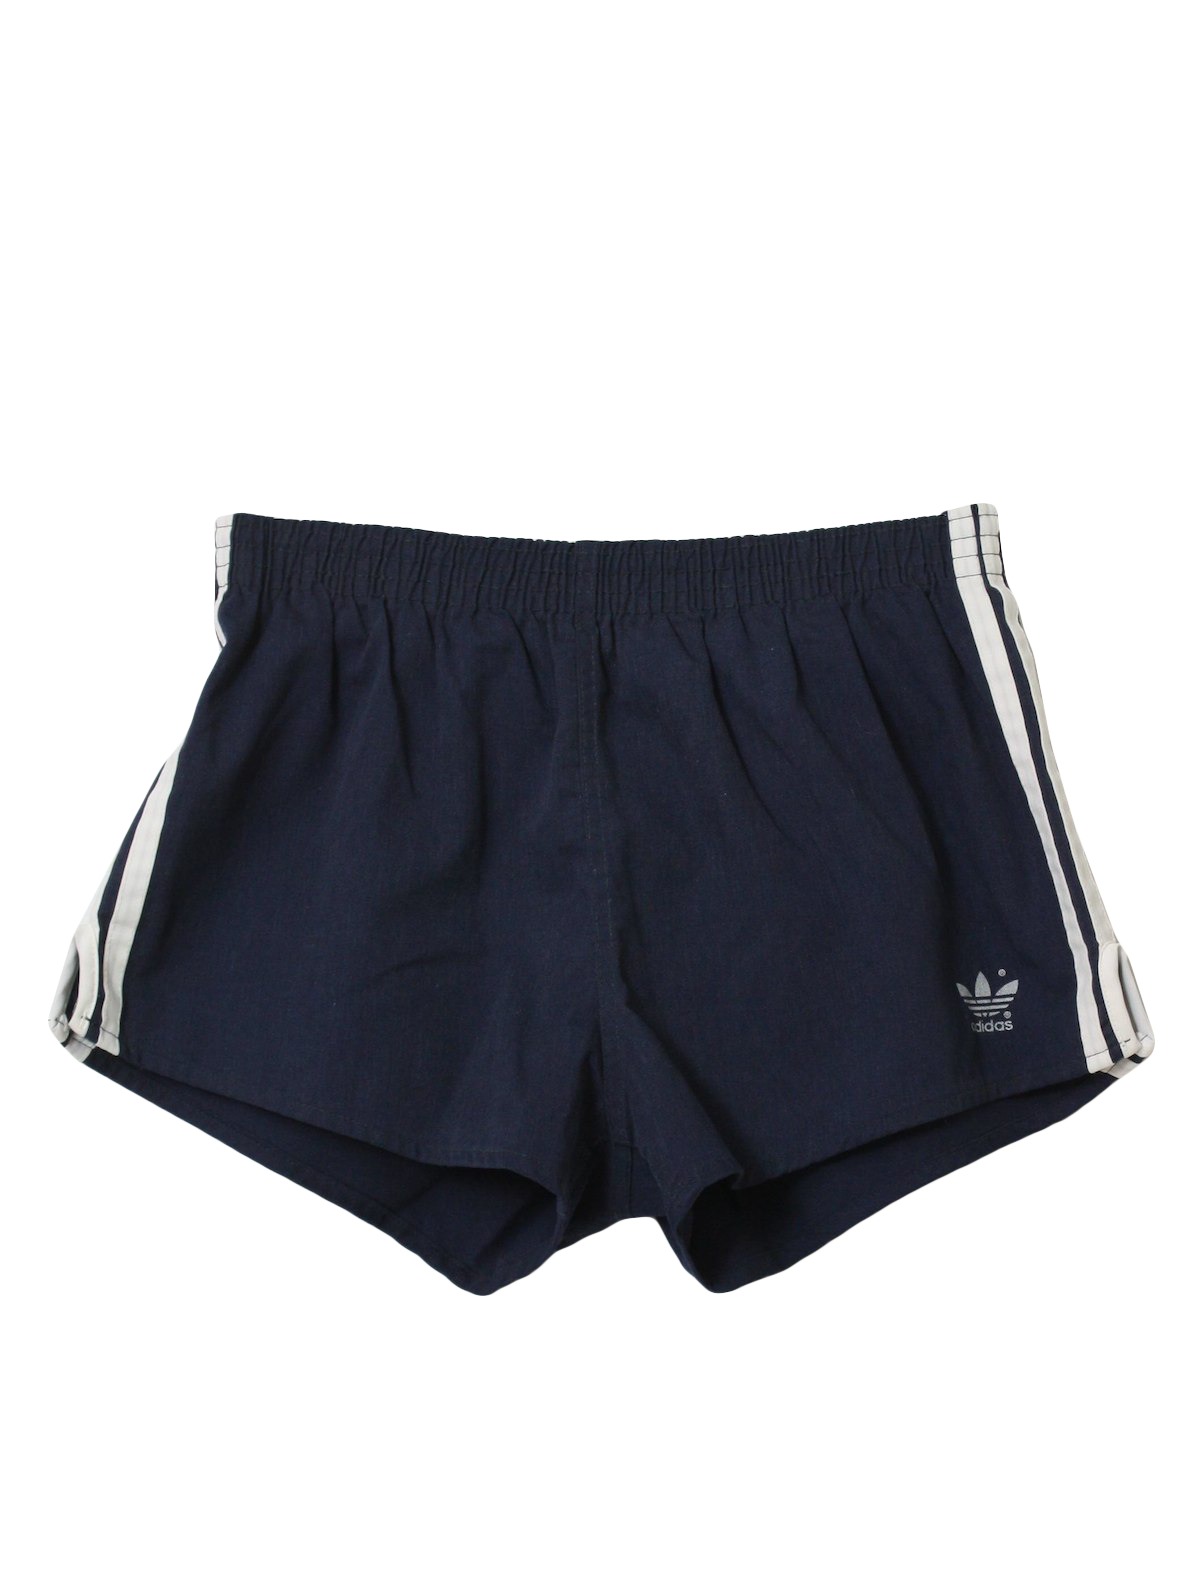 80's Adidas Made in USA Shorts: 80s -Adidas Made in USA- Mens blue ...